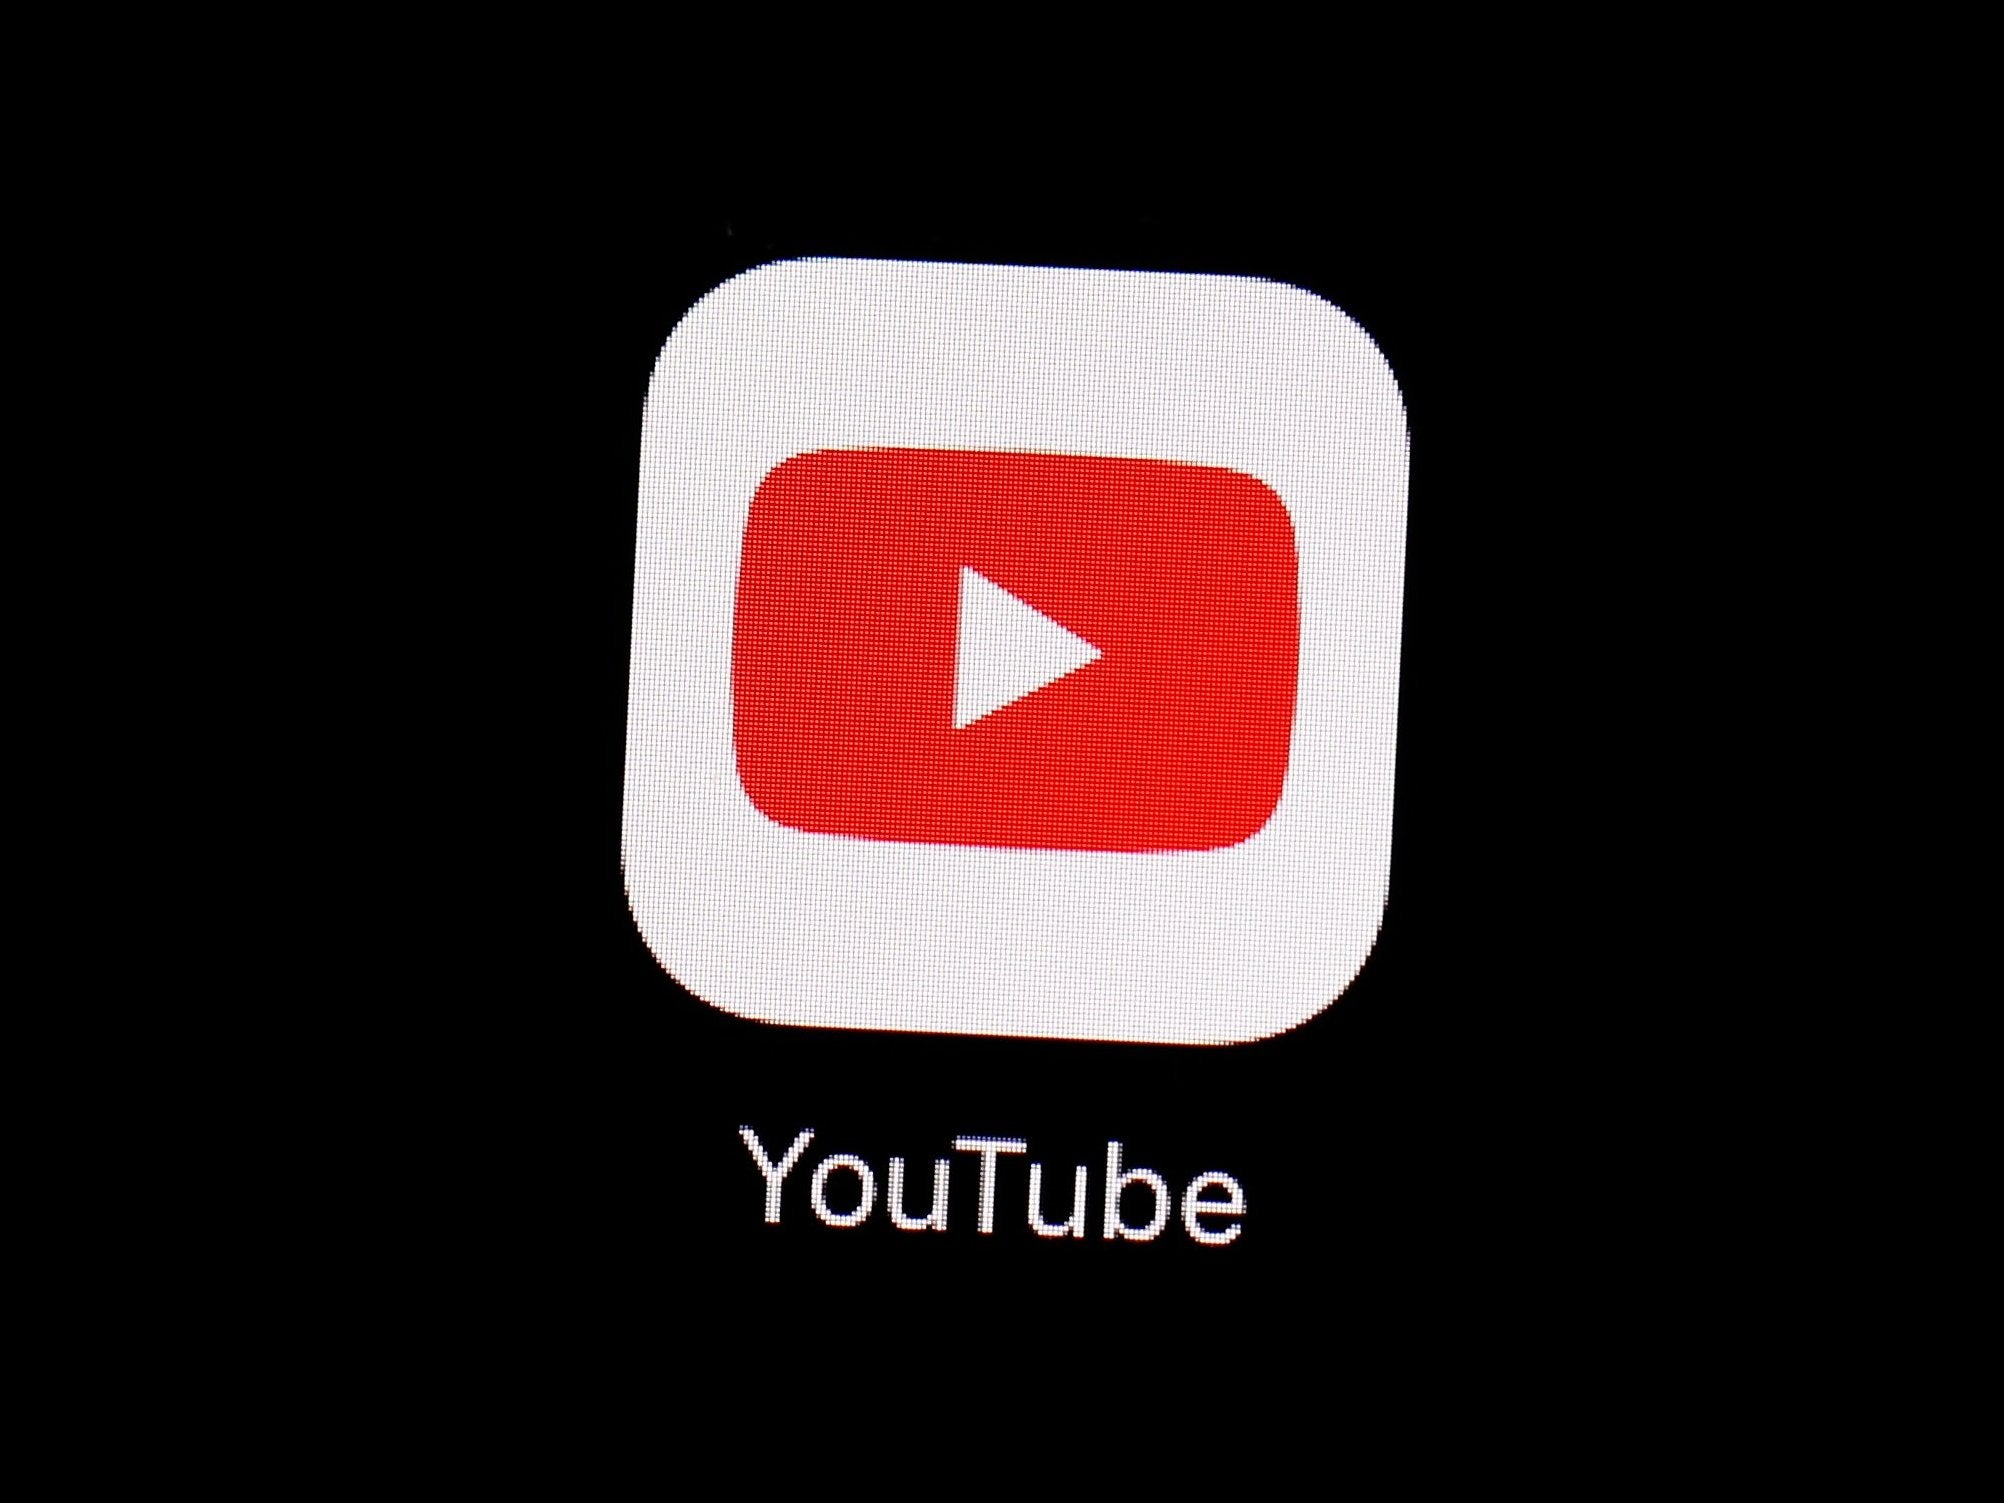 YouTube says it disabled comments on tens of millions of videos over the past week